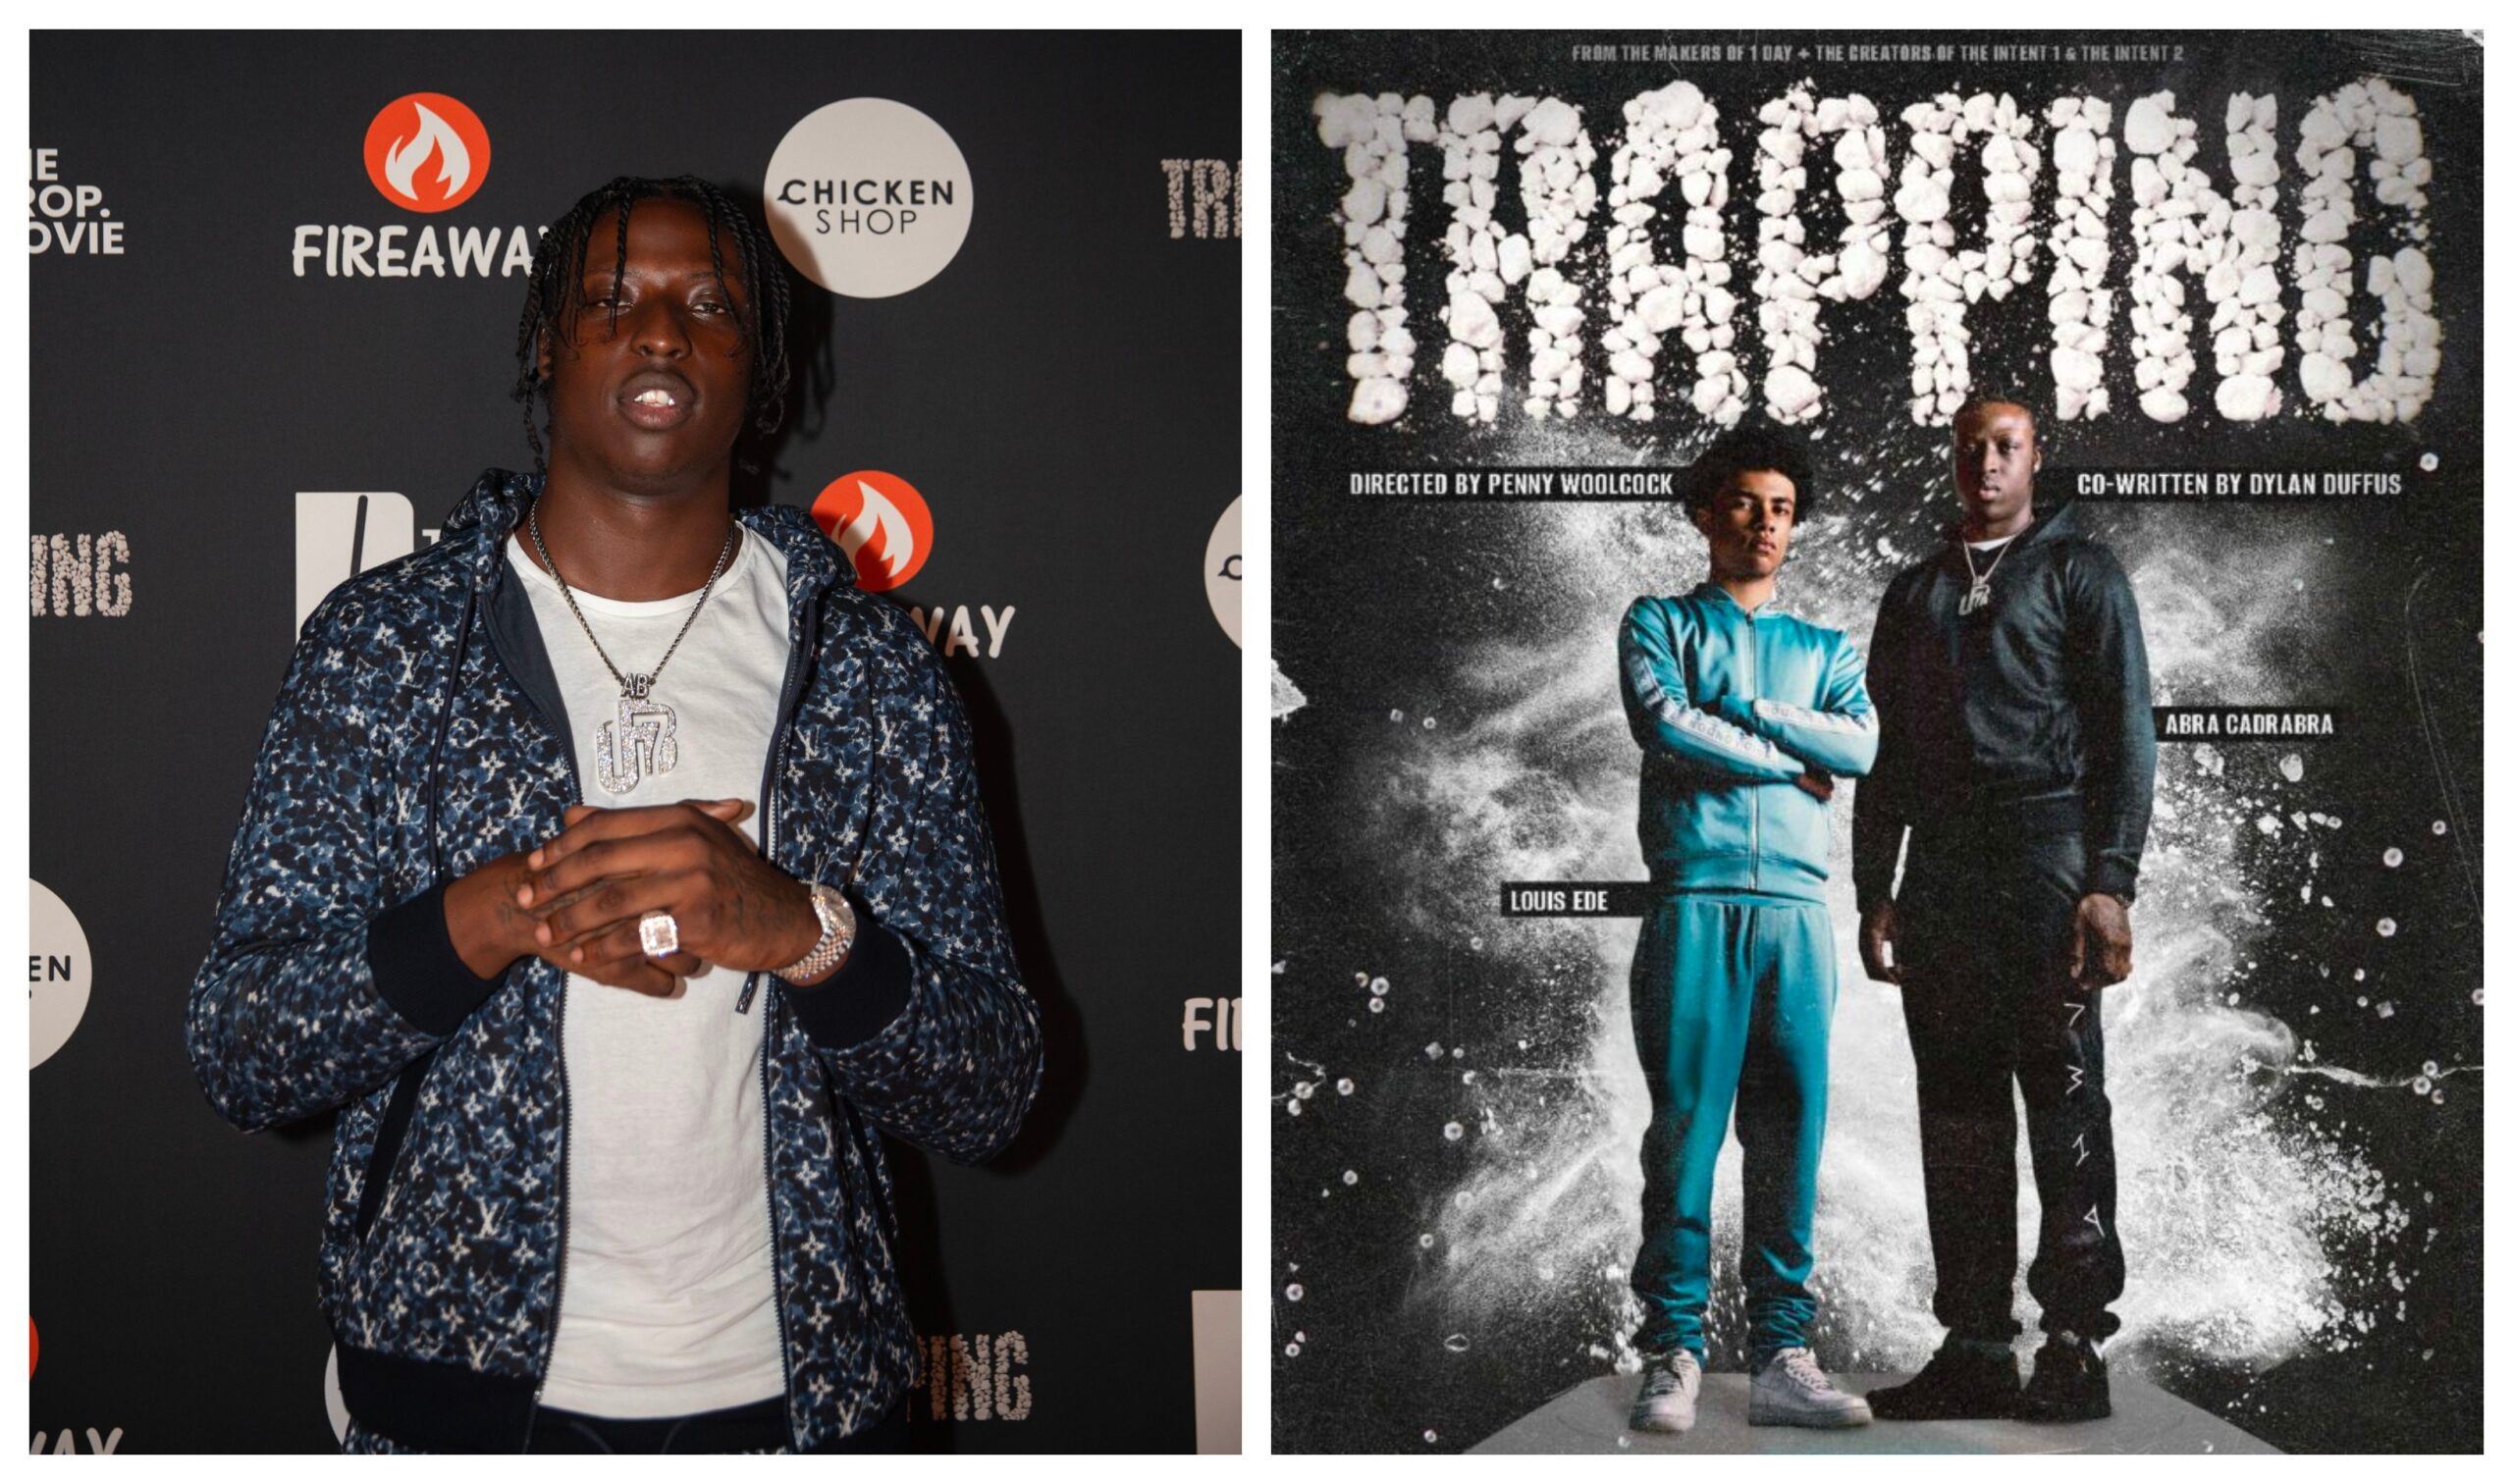 ‘Trapping’ Launch Fuses Fiery Film with Hard-Hitting Soundtrack